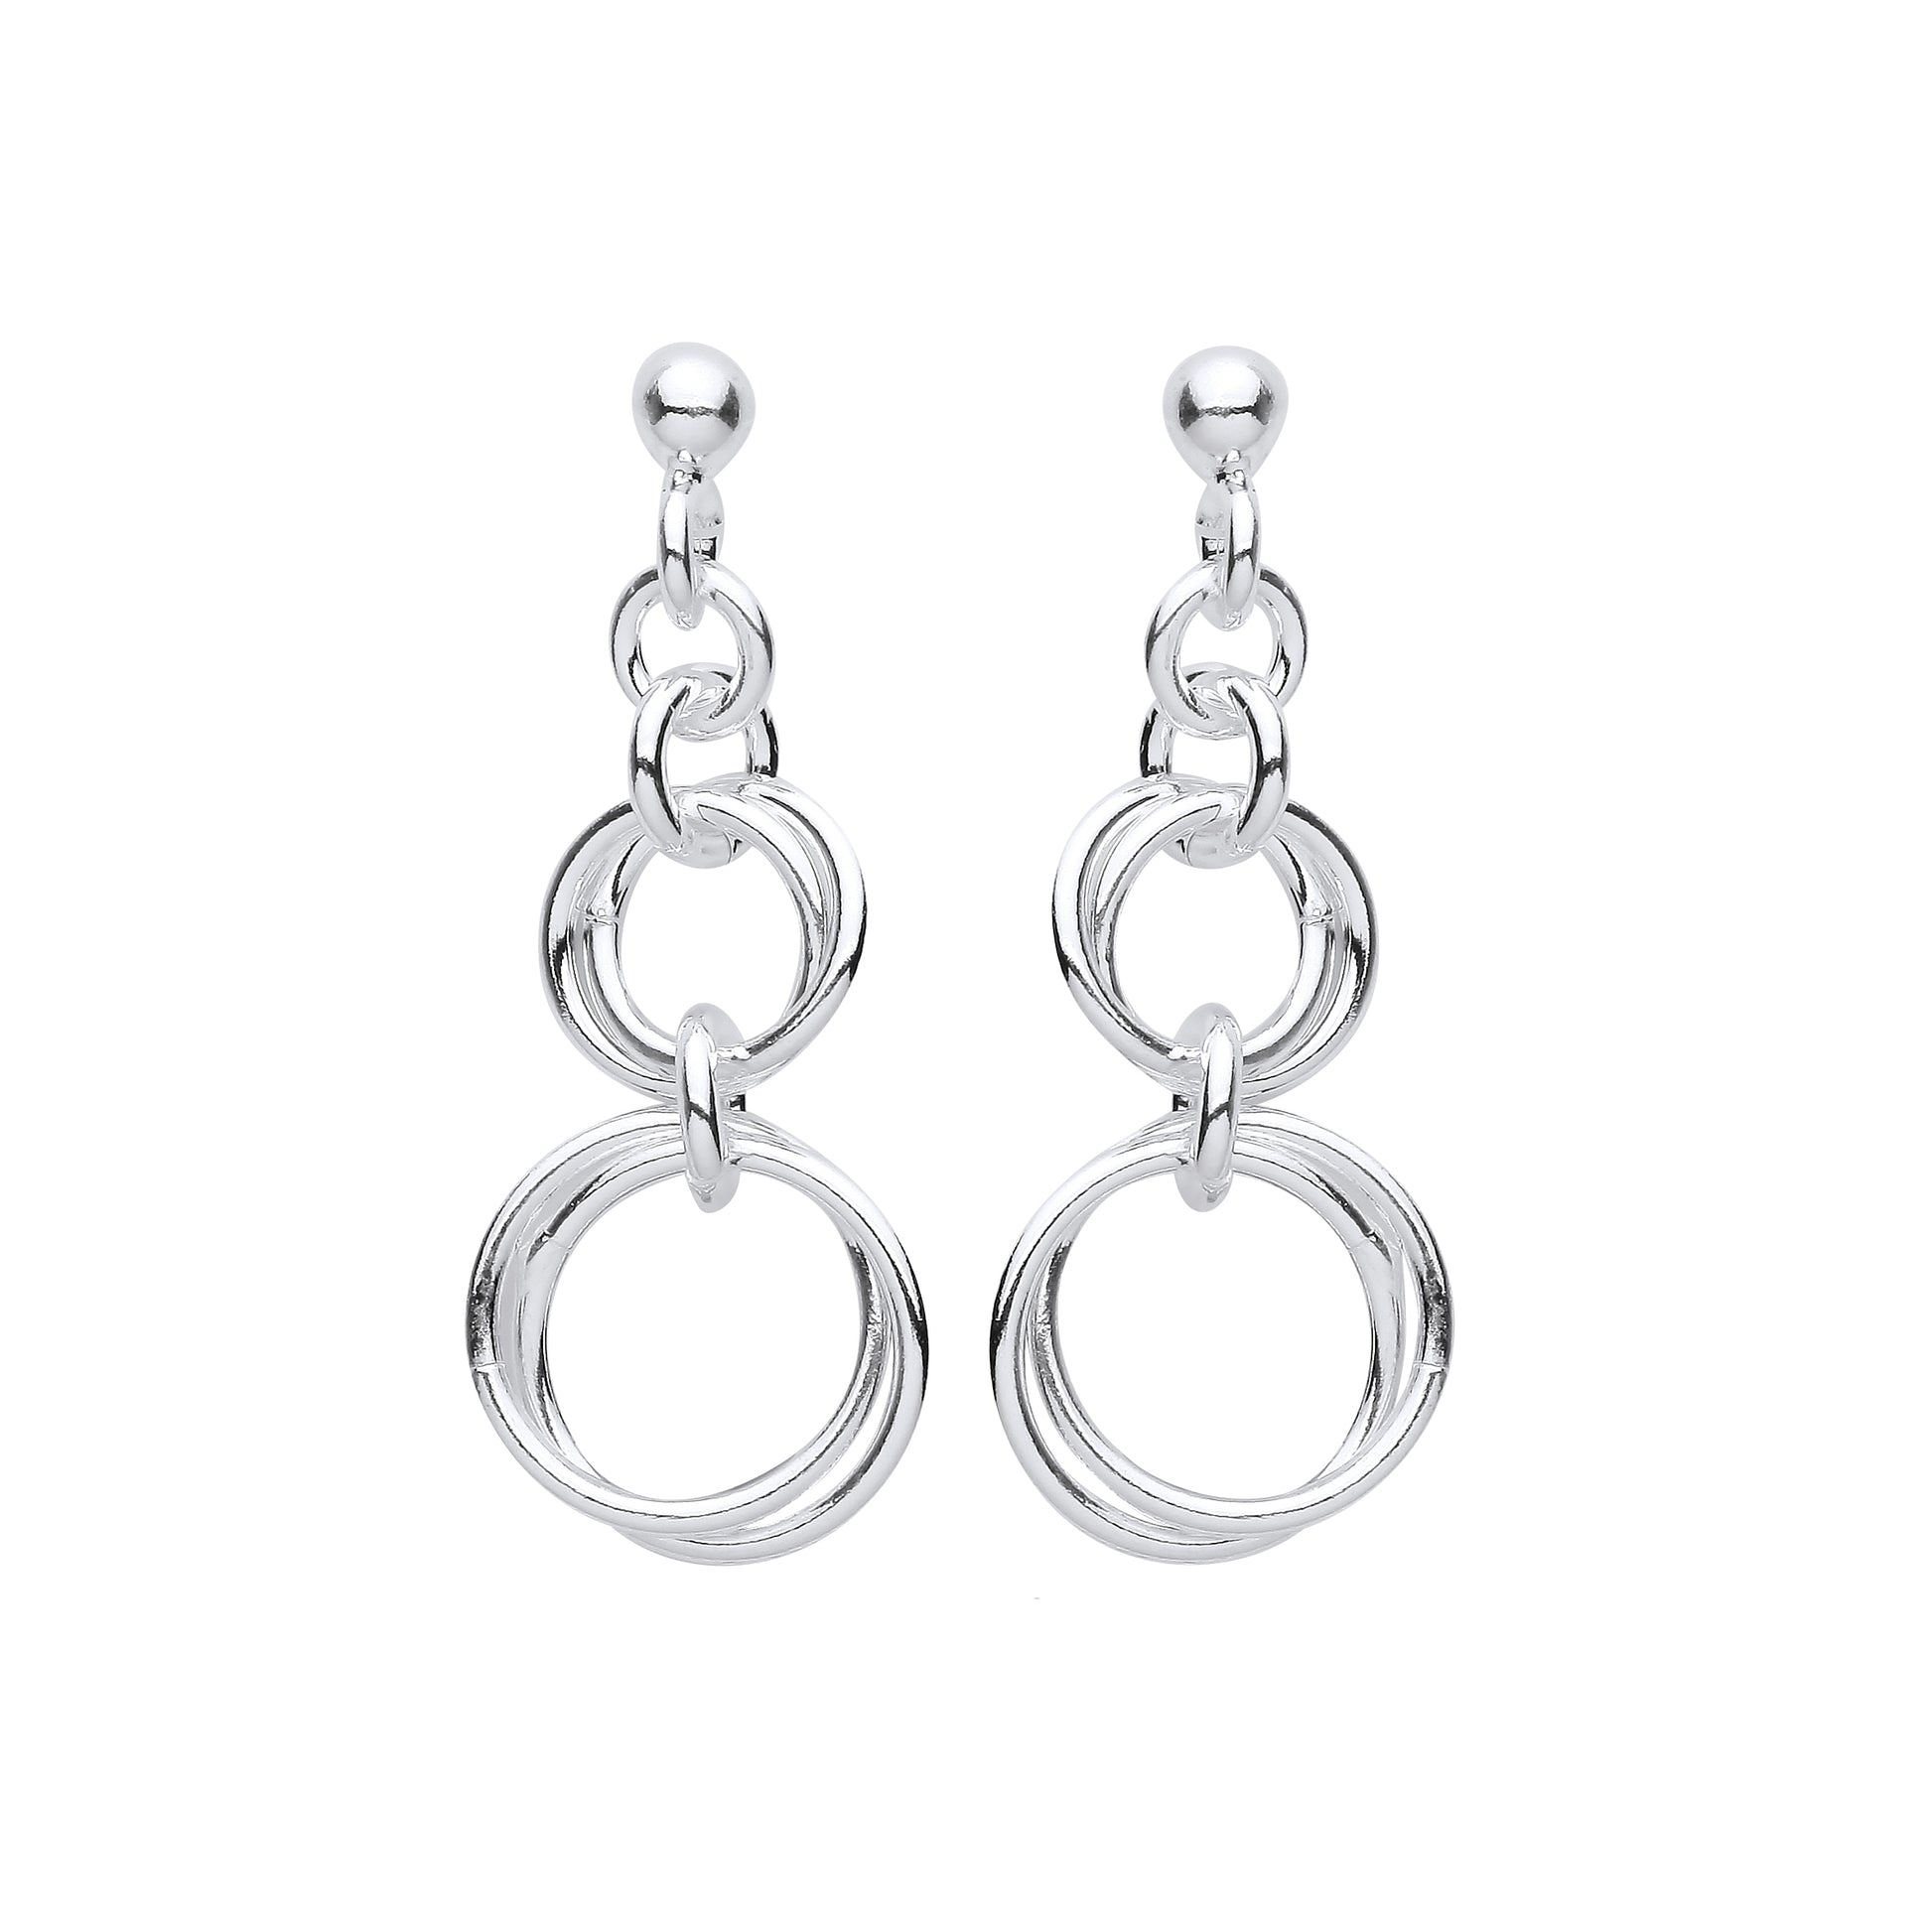 Silver  Graduated Chinese Magic Linked Rings Drop Earrings - EAG1149